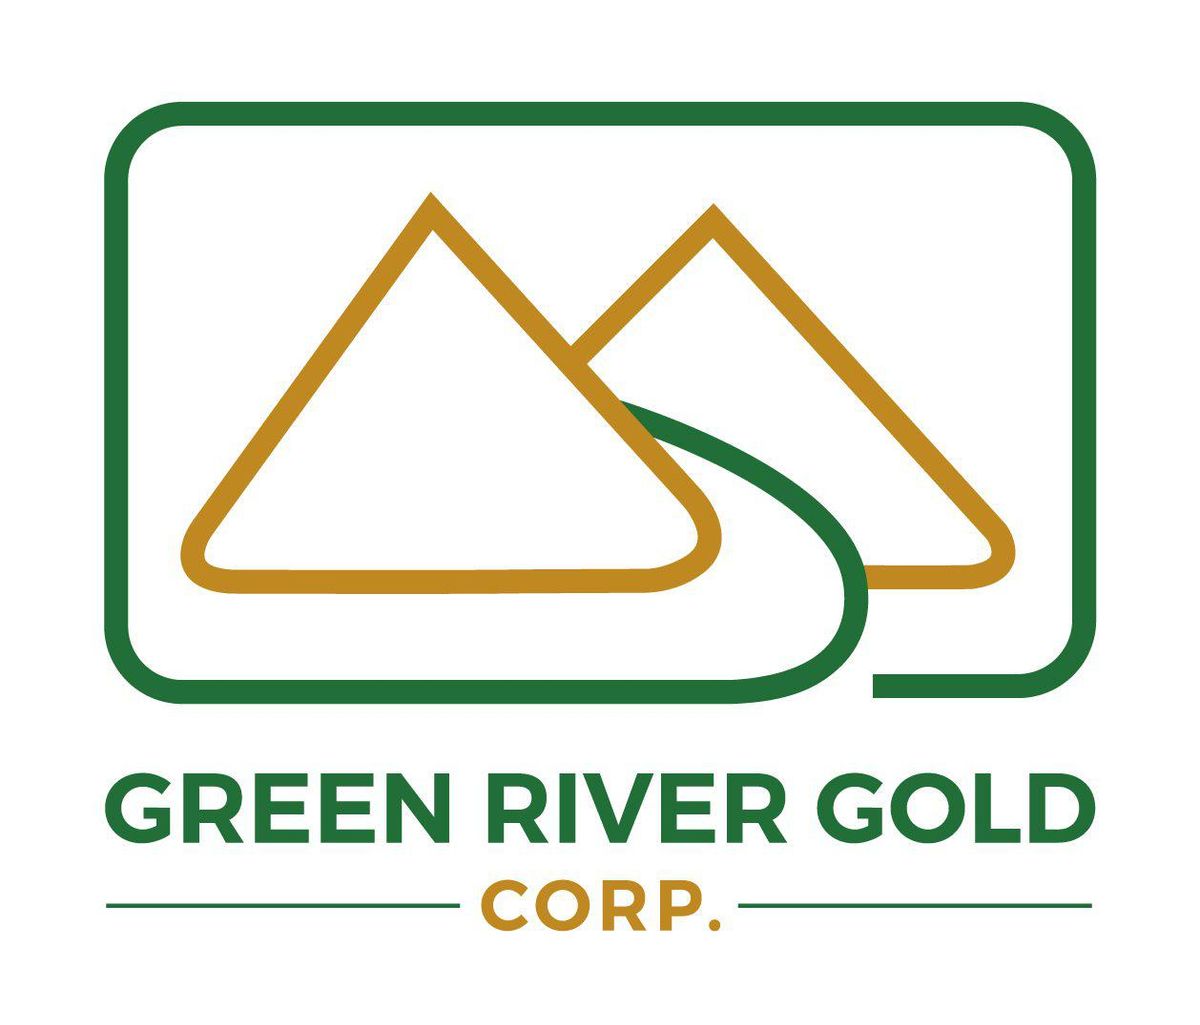 Green River Gold Corp. Achieves XRF Results Averaging 0.197% Nickel Beginning at Surface in the Initial Hole Drilled on the Deep Purple Target at Quesnel